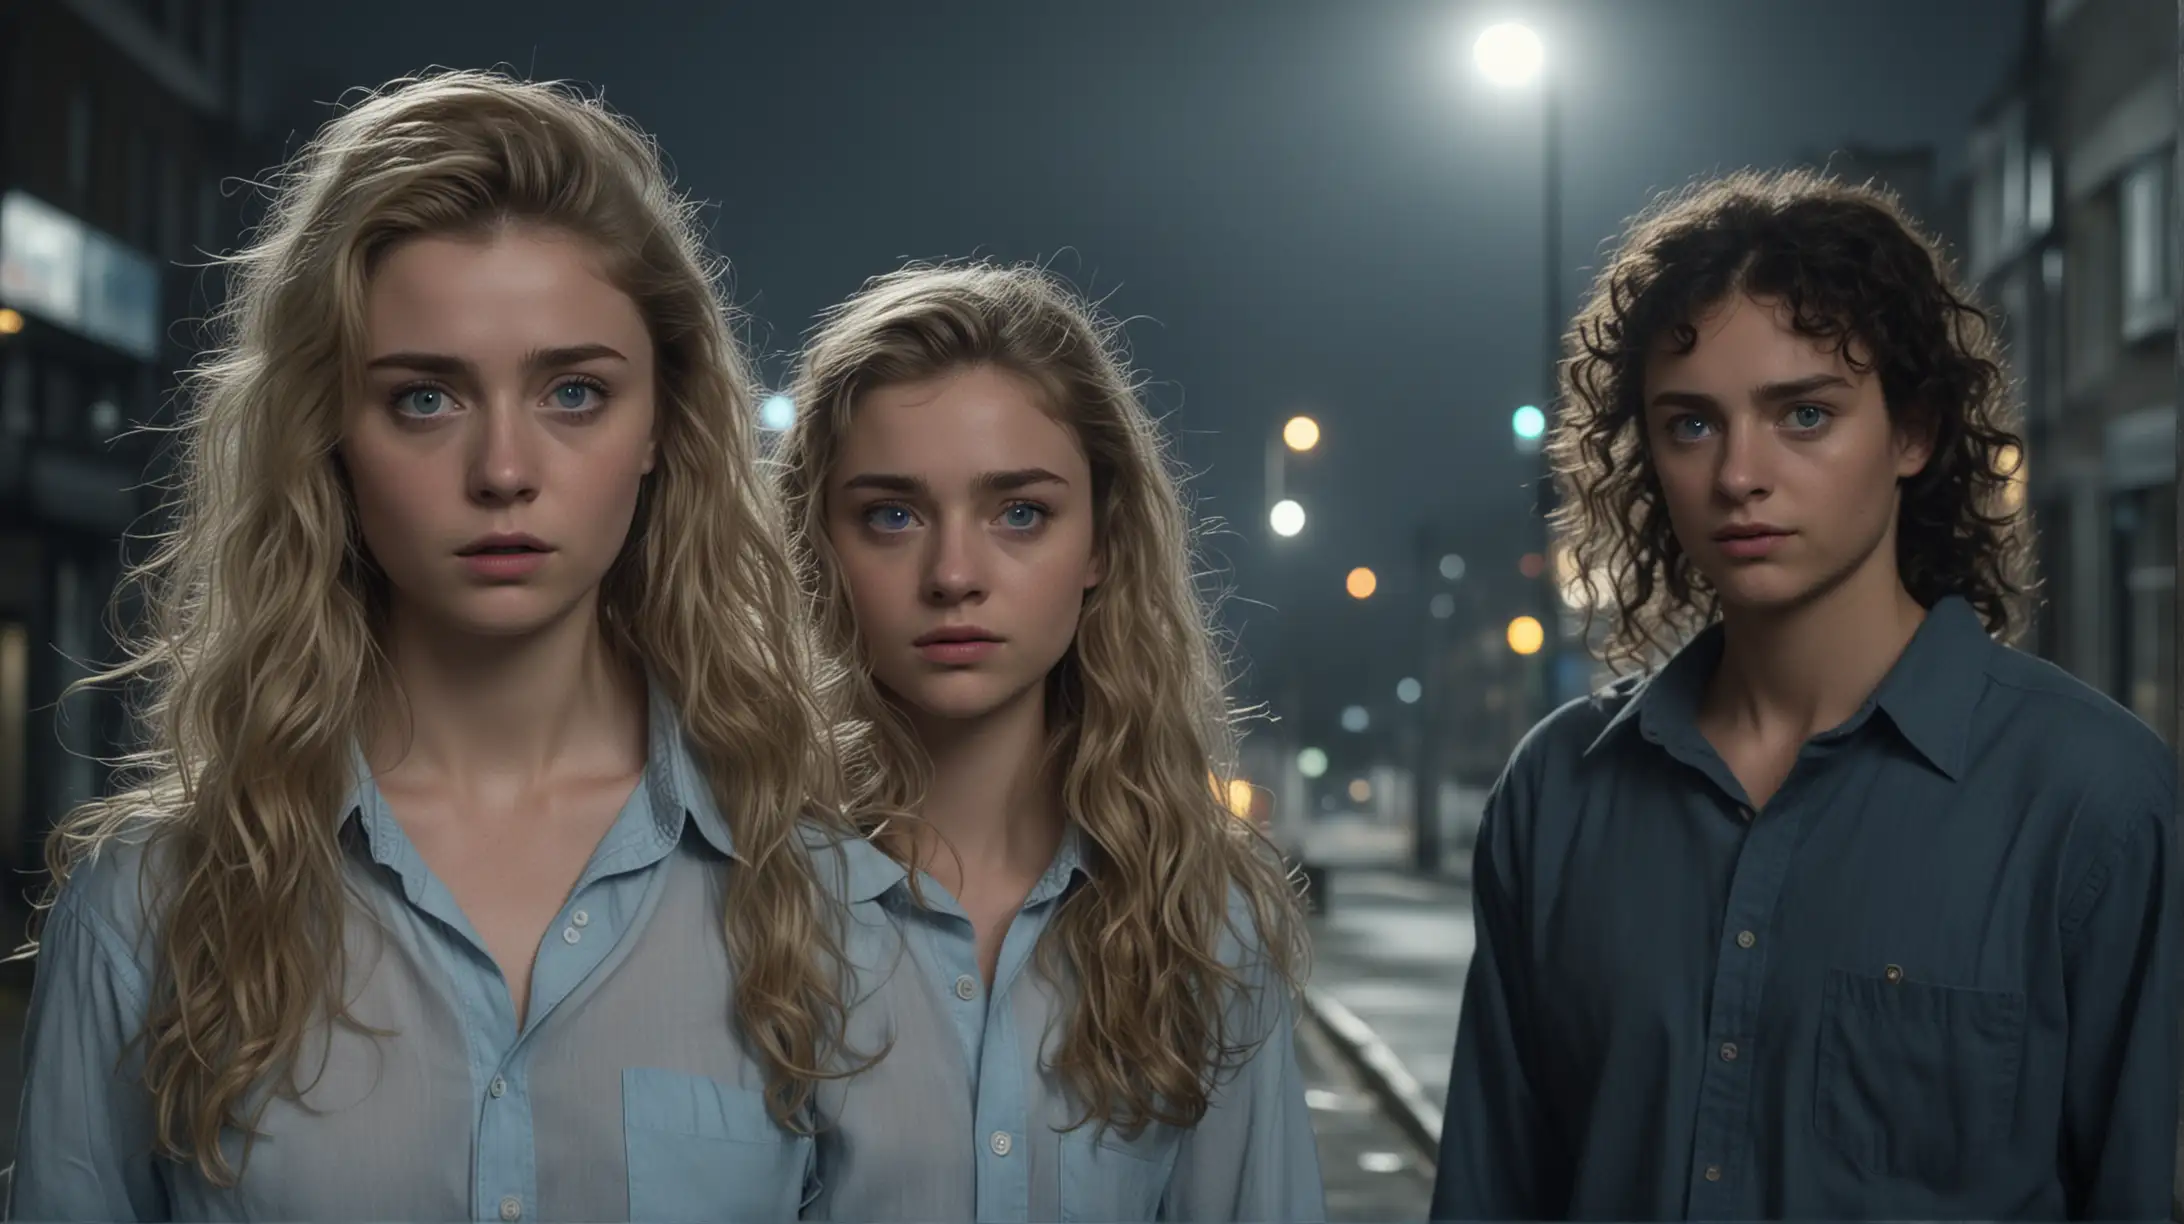 create a photorealistic image of a teenage girl long blonde hair blue eyes, looks like Jessica Barden and a 50-year-old man in shirt and tire, thick curly hair, unshaven, they are standing together on a deserted street corner in London.  It is a moonlit foggy night.  We get an eerie sense of deception.

